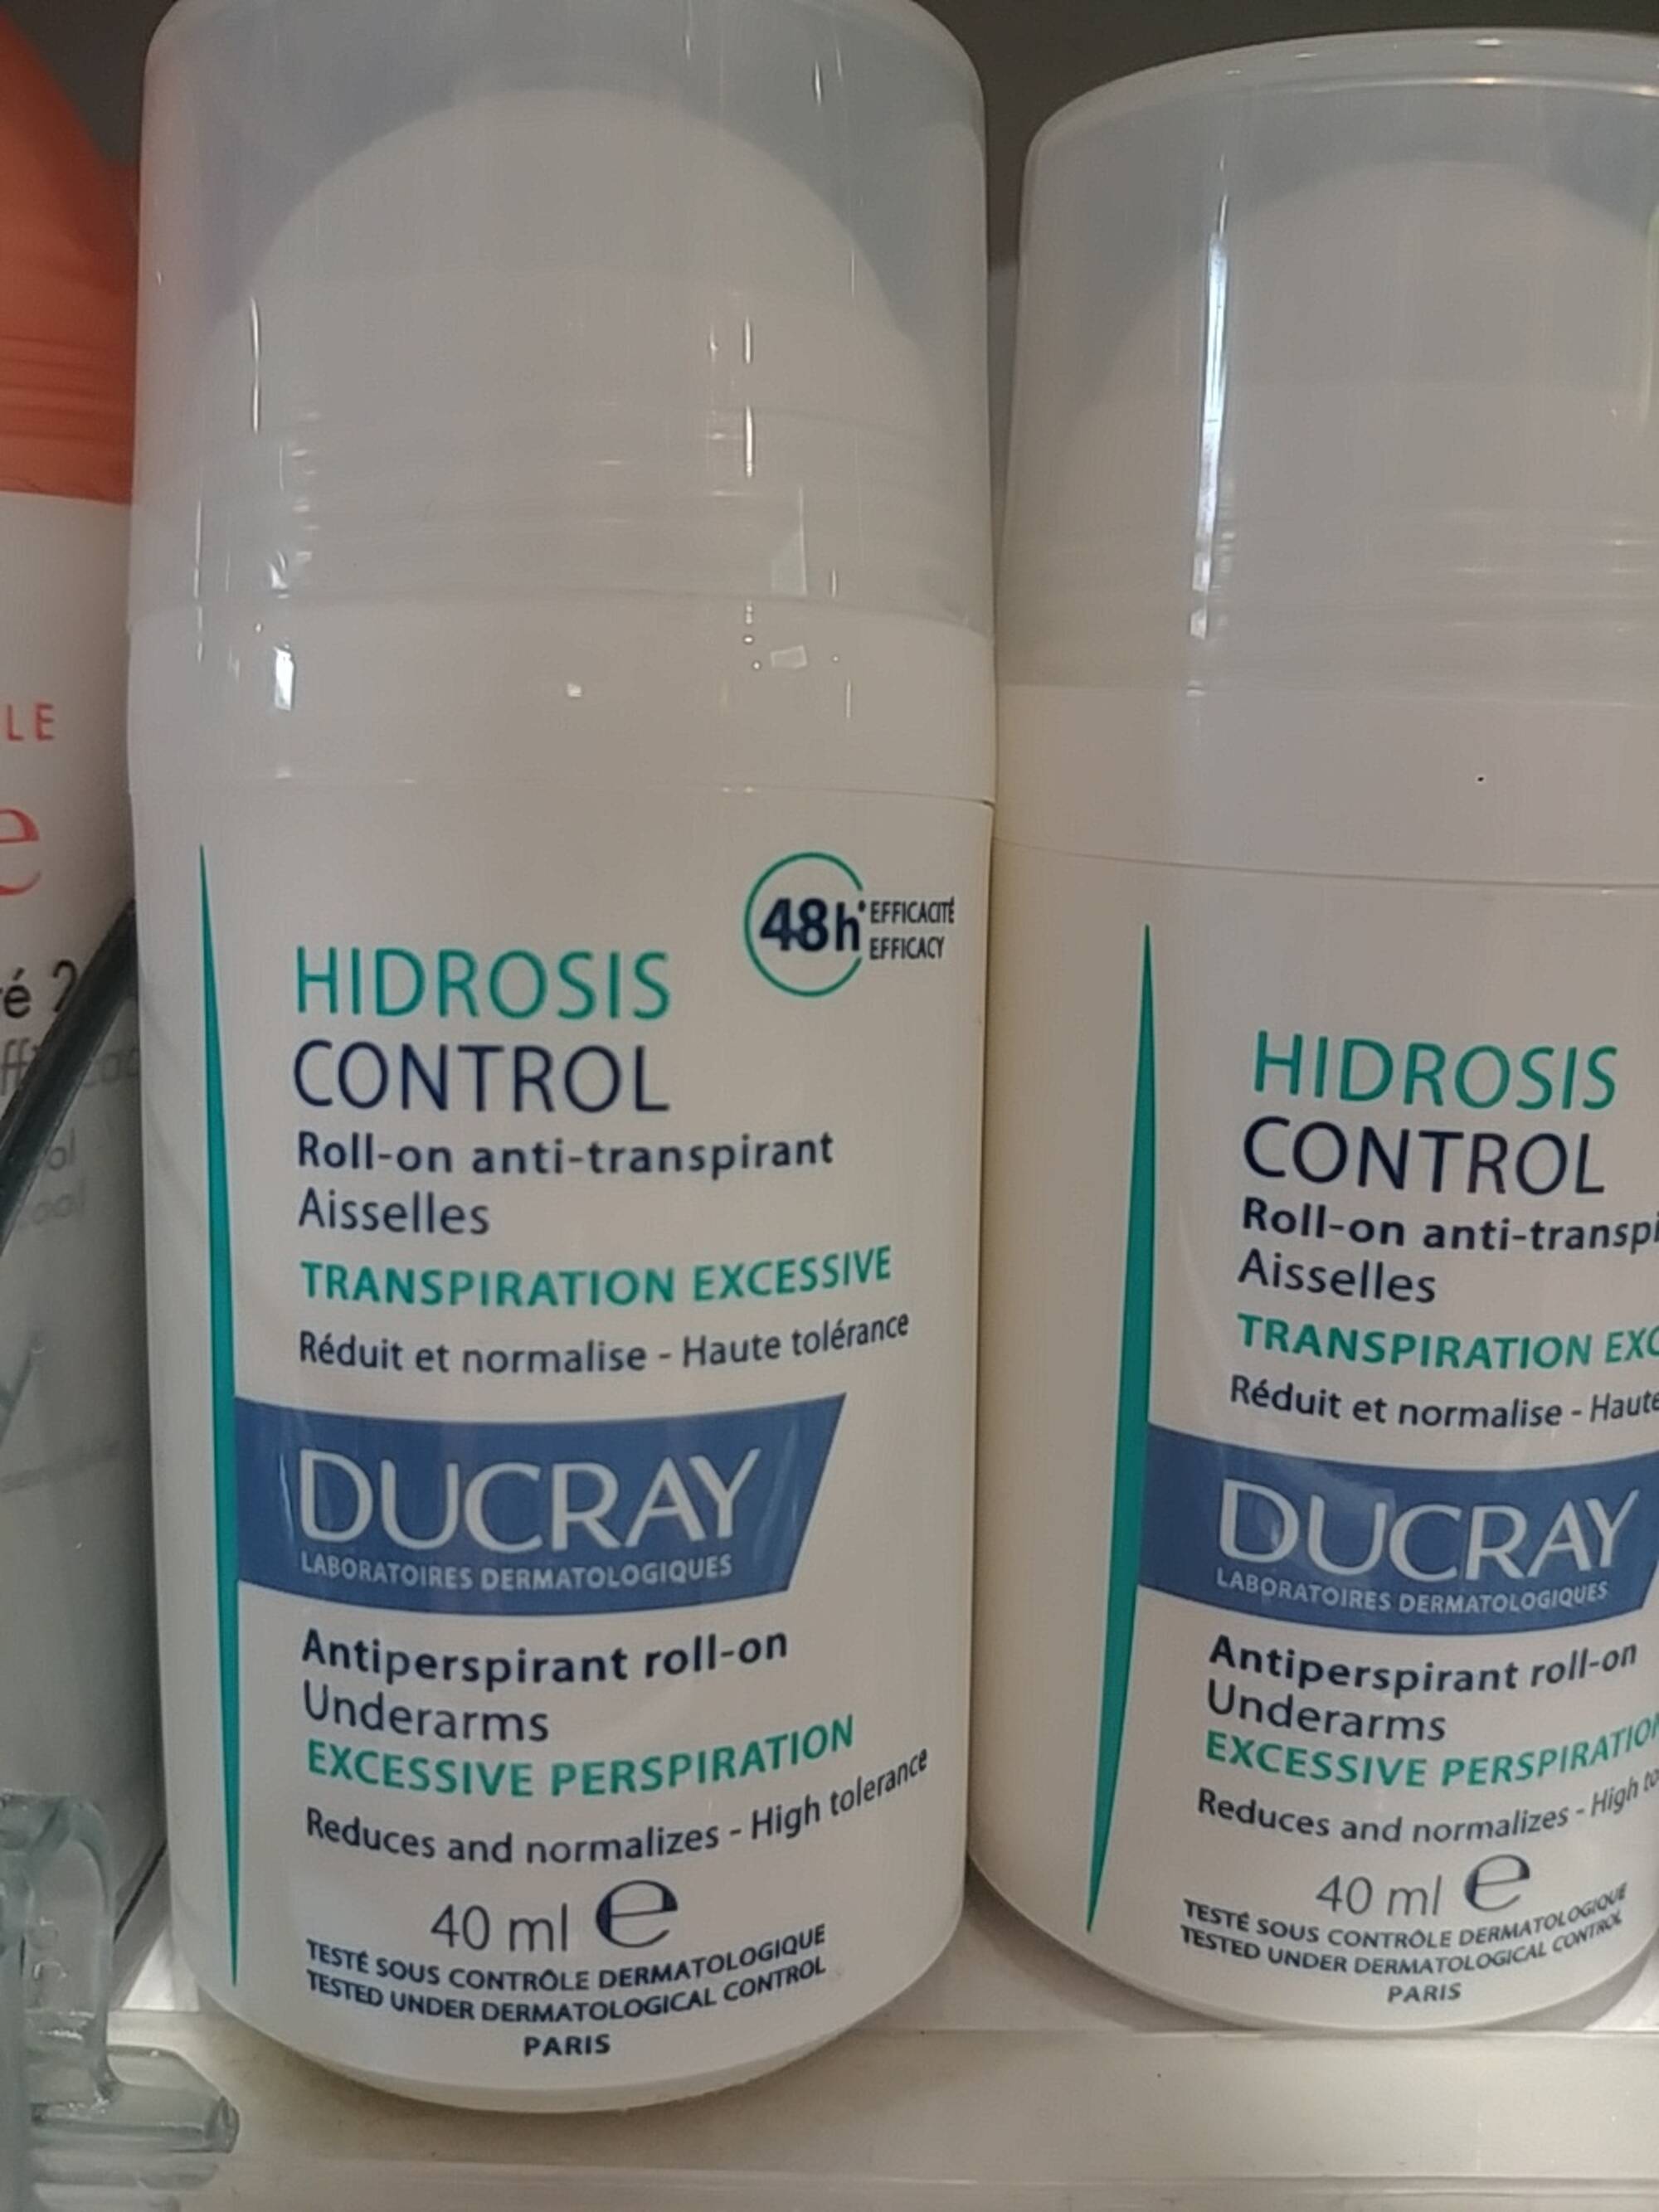 DUCRAY - Hidrosis control - Roll-on anti-transpirant aisselles